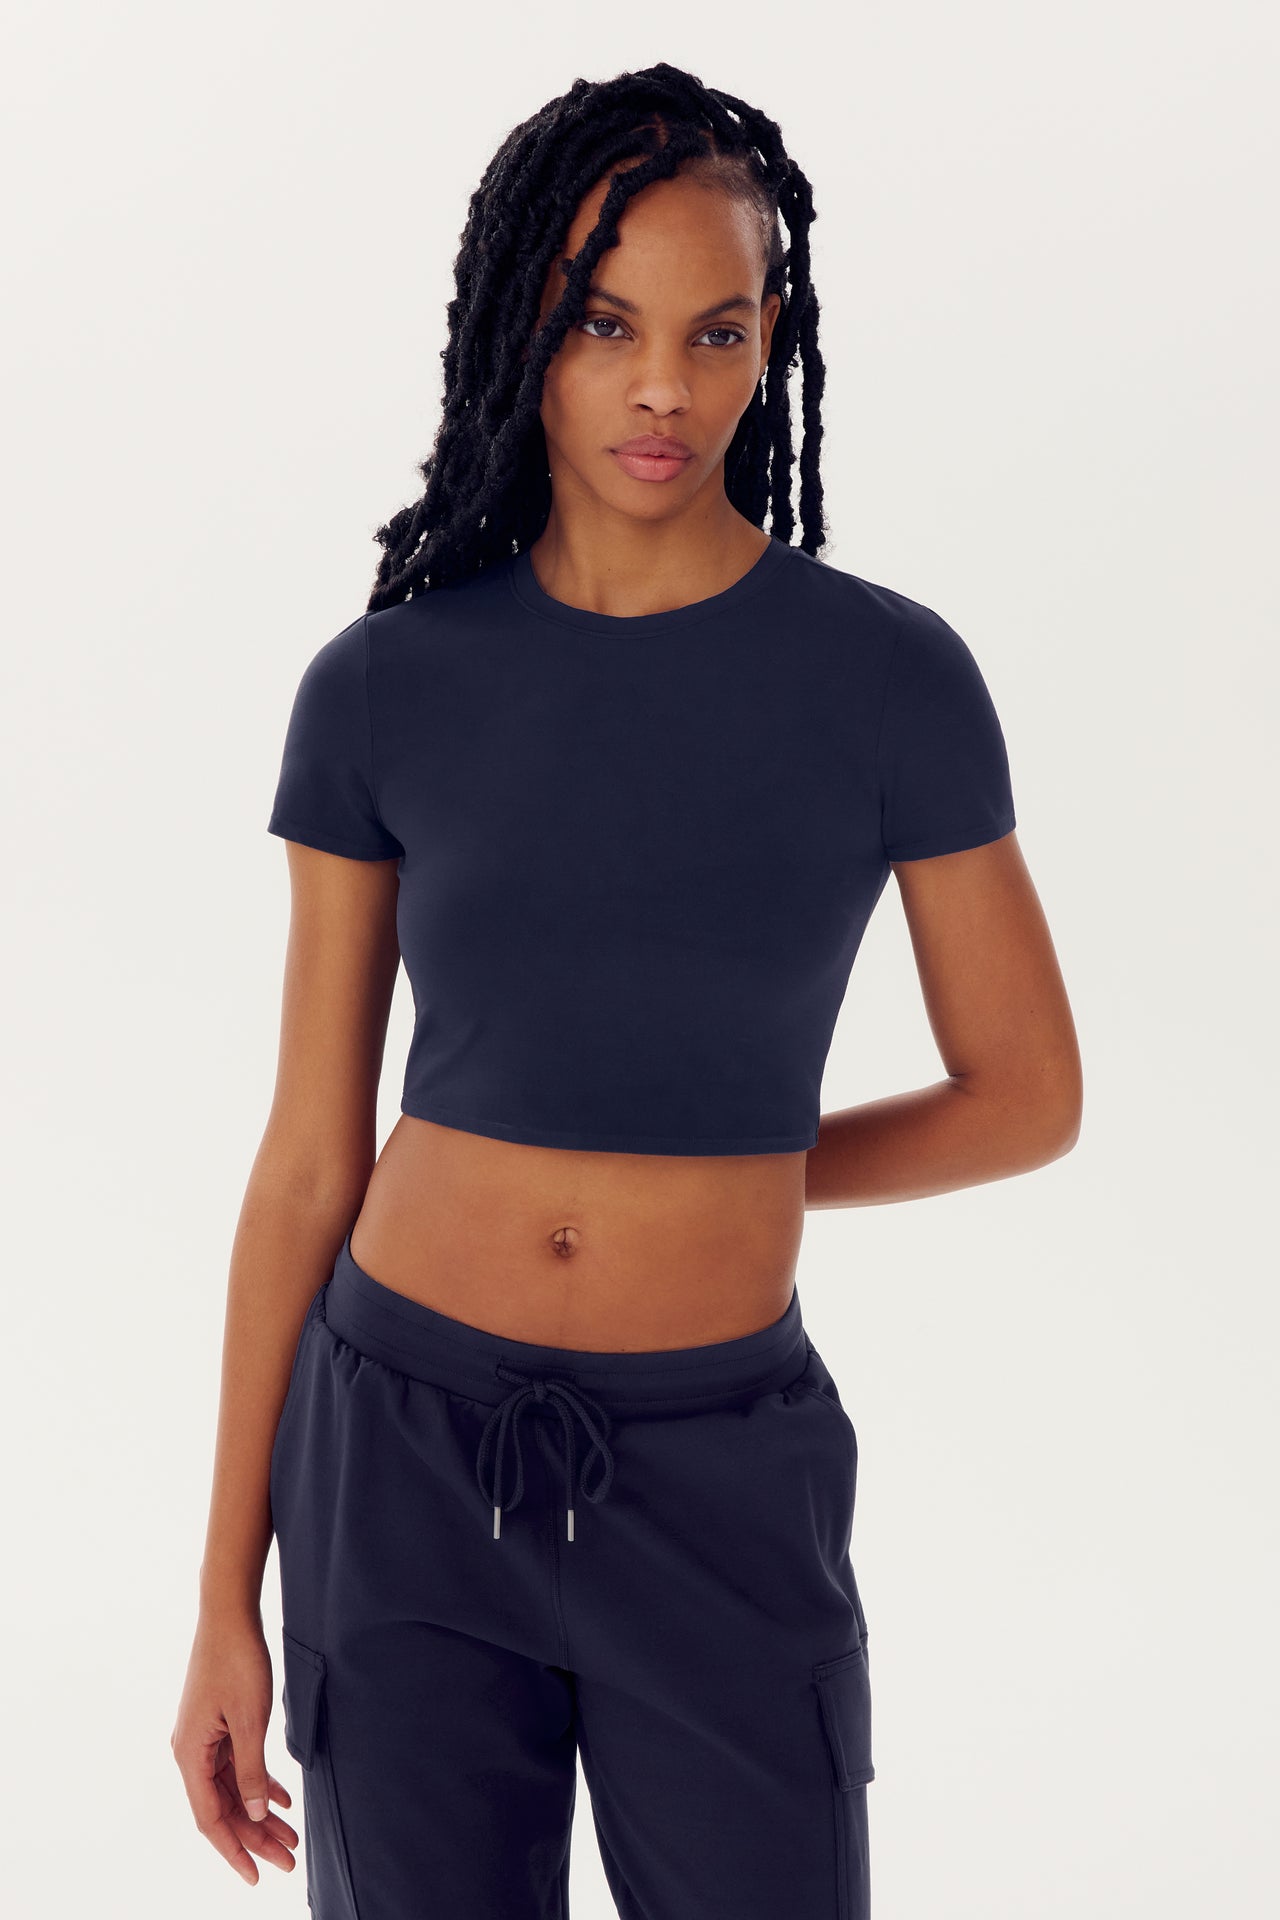 A woman in a black SPLITS59 Airweight S/S Crop - Indigo and sweatpants posing against a white background.